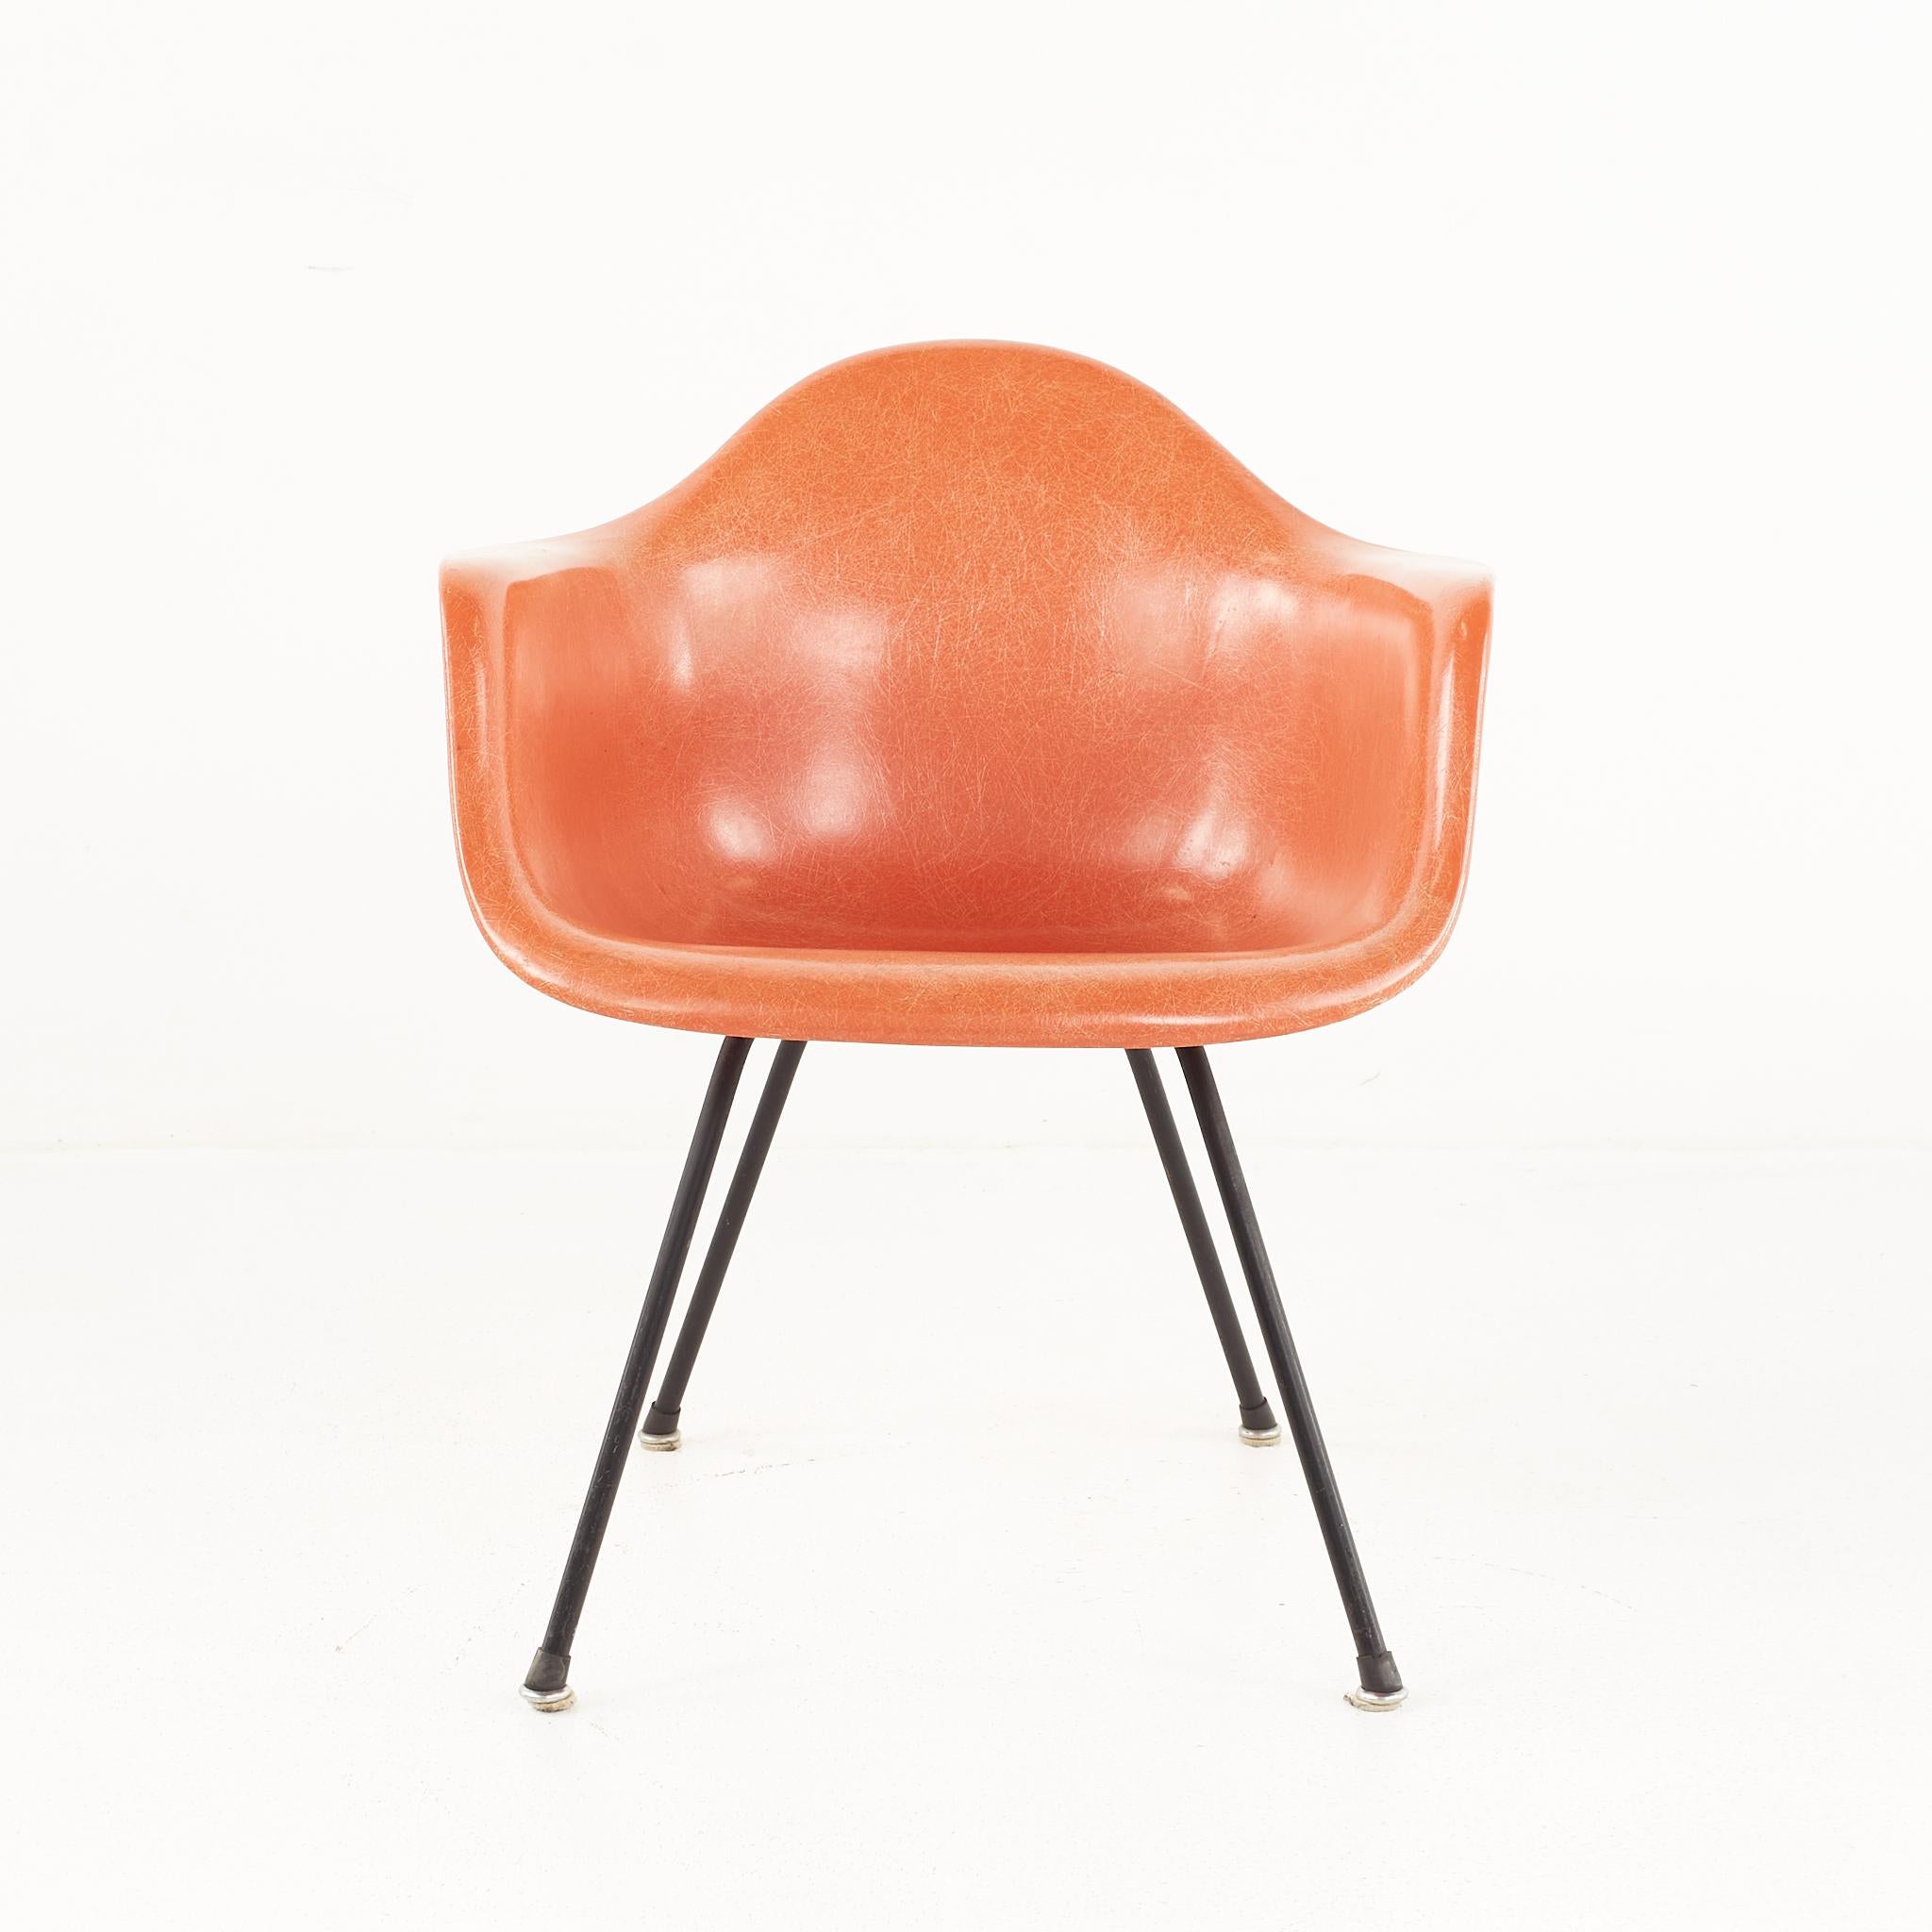 Early Charles and Ray Eames for Herman Miller Mid Century Orange Fiberglass Shell Arm Chair

This chair measures: 24.75 wide x 20 deep x 27.5 inches high, with a seat height of 15.75 and arm height of 23.5 inches

All pieces of furniture can be